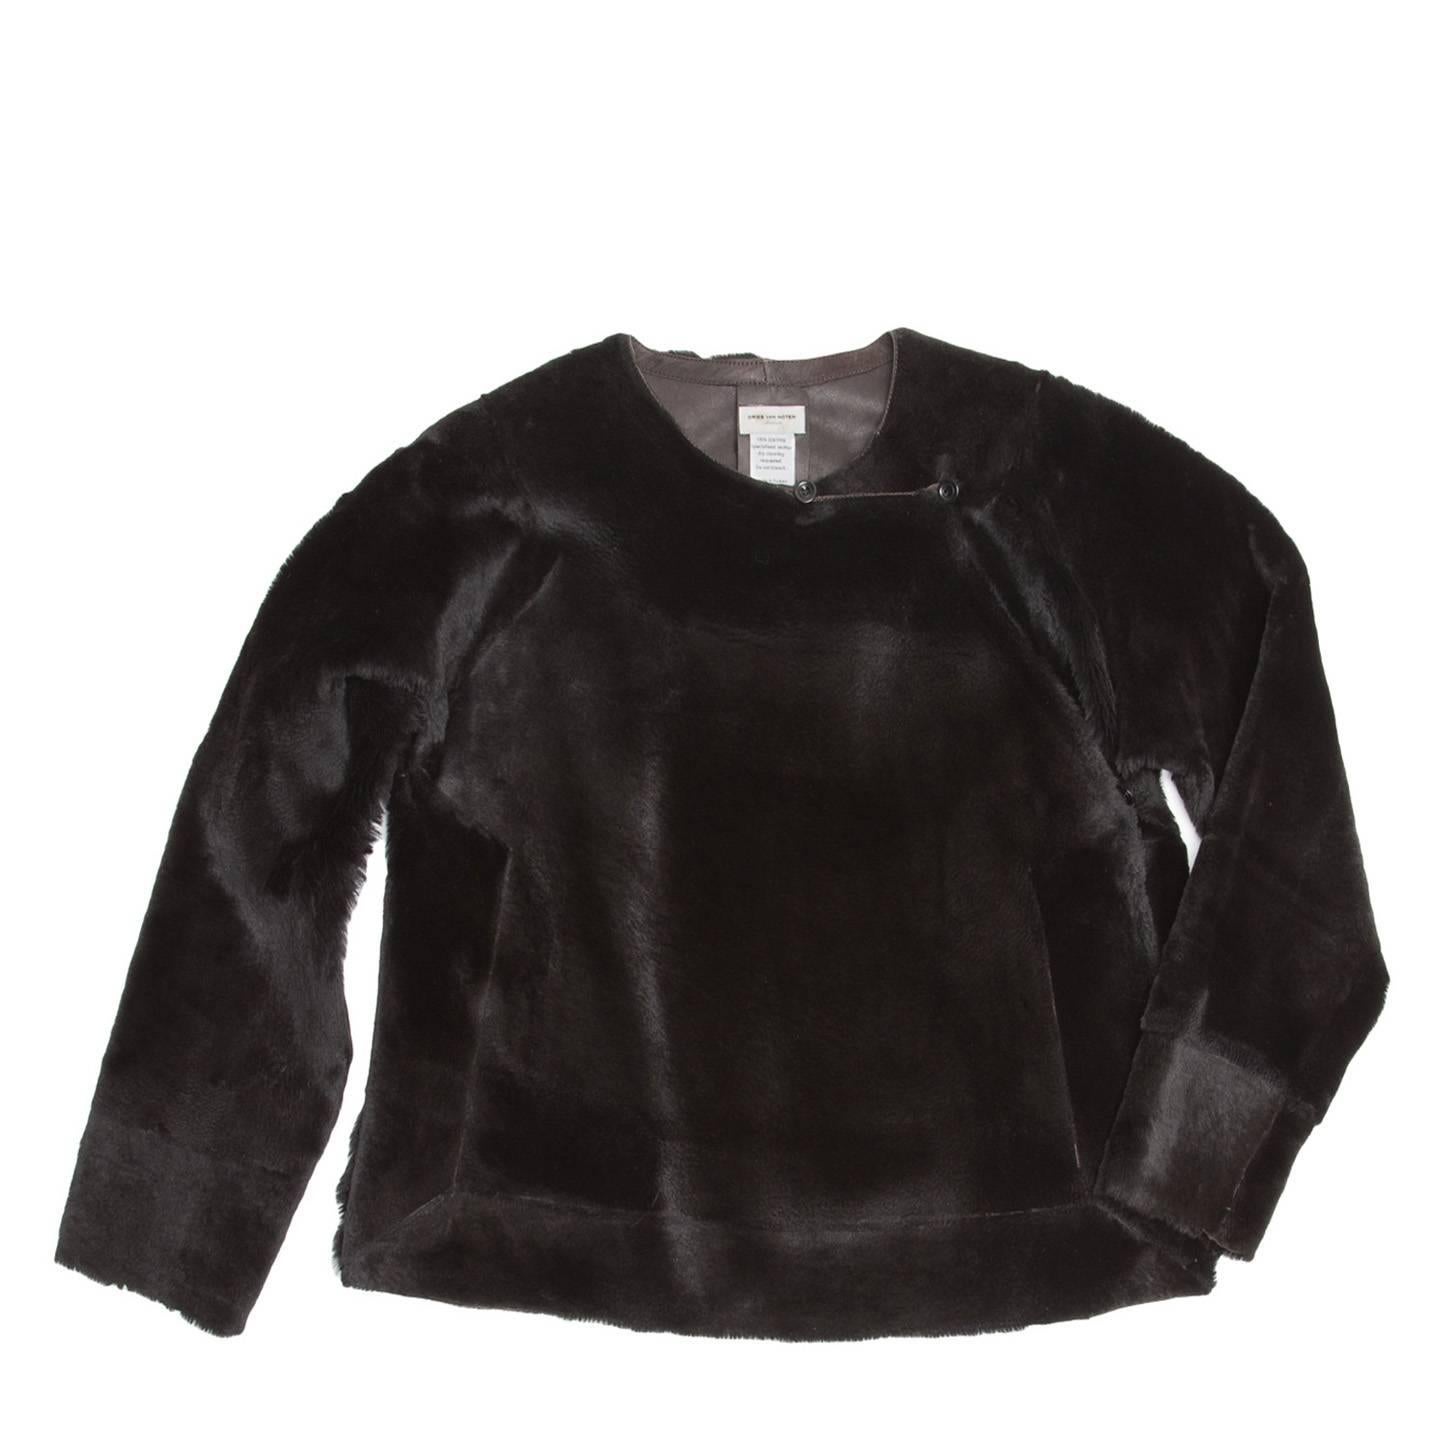 Black kangaroo fur cropped jacket with an elegant round neck and an asymmetric side closure with little buttons and leather loops.

Size  M Universal sizing

Condition  Excellent: worn a few times